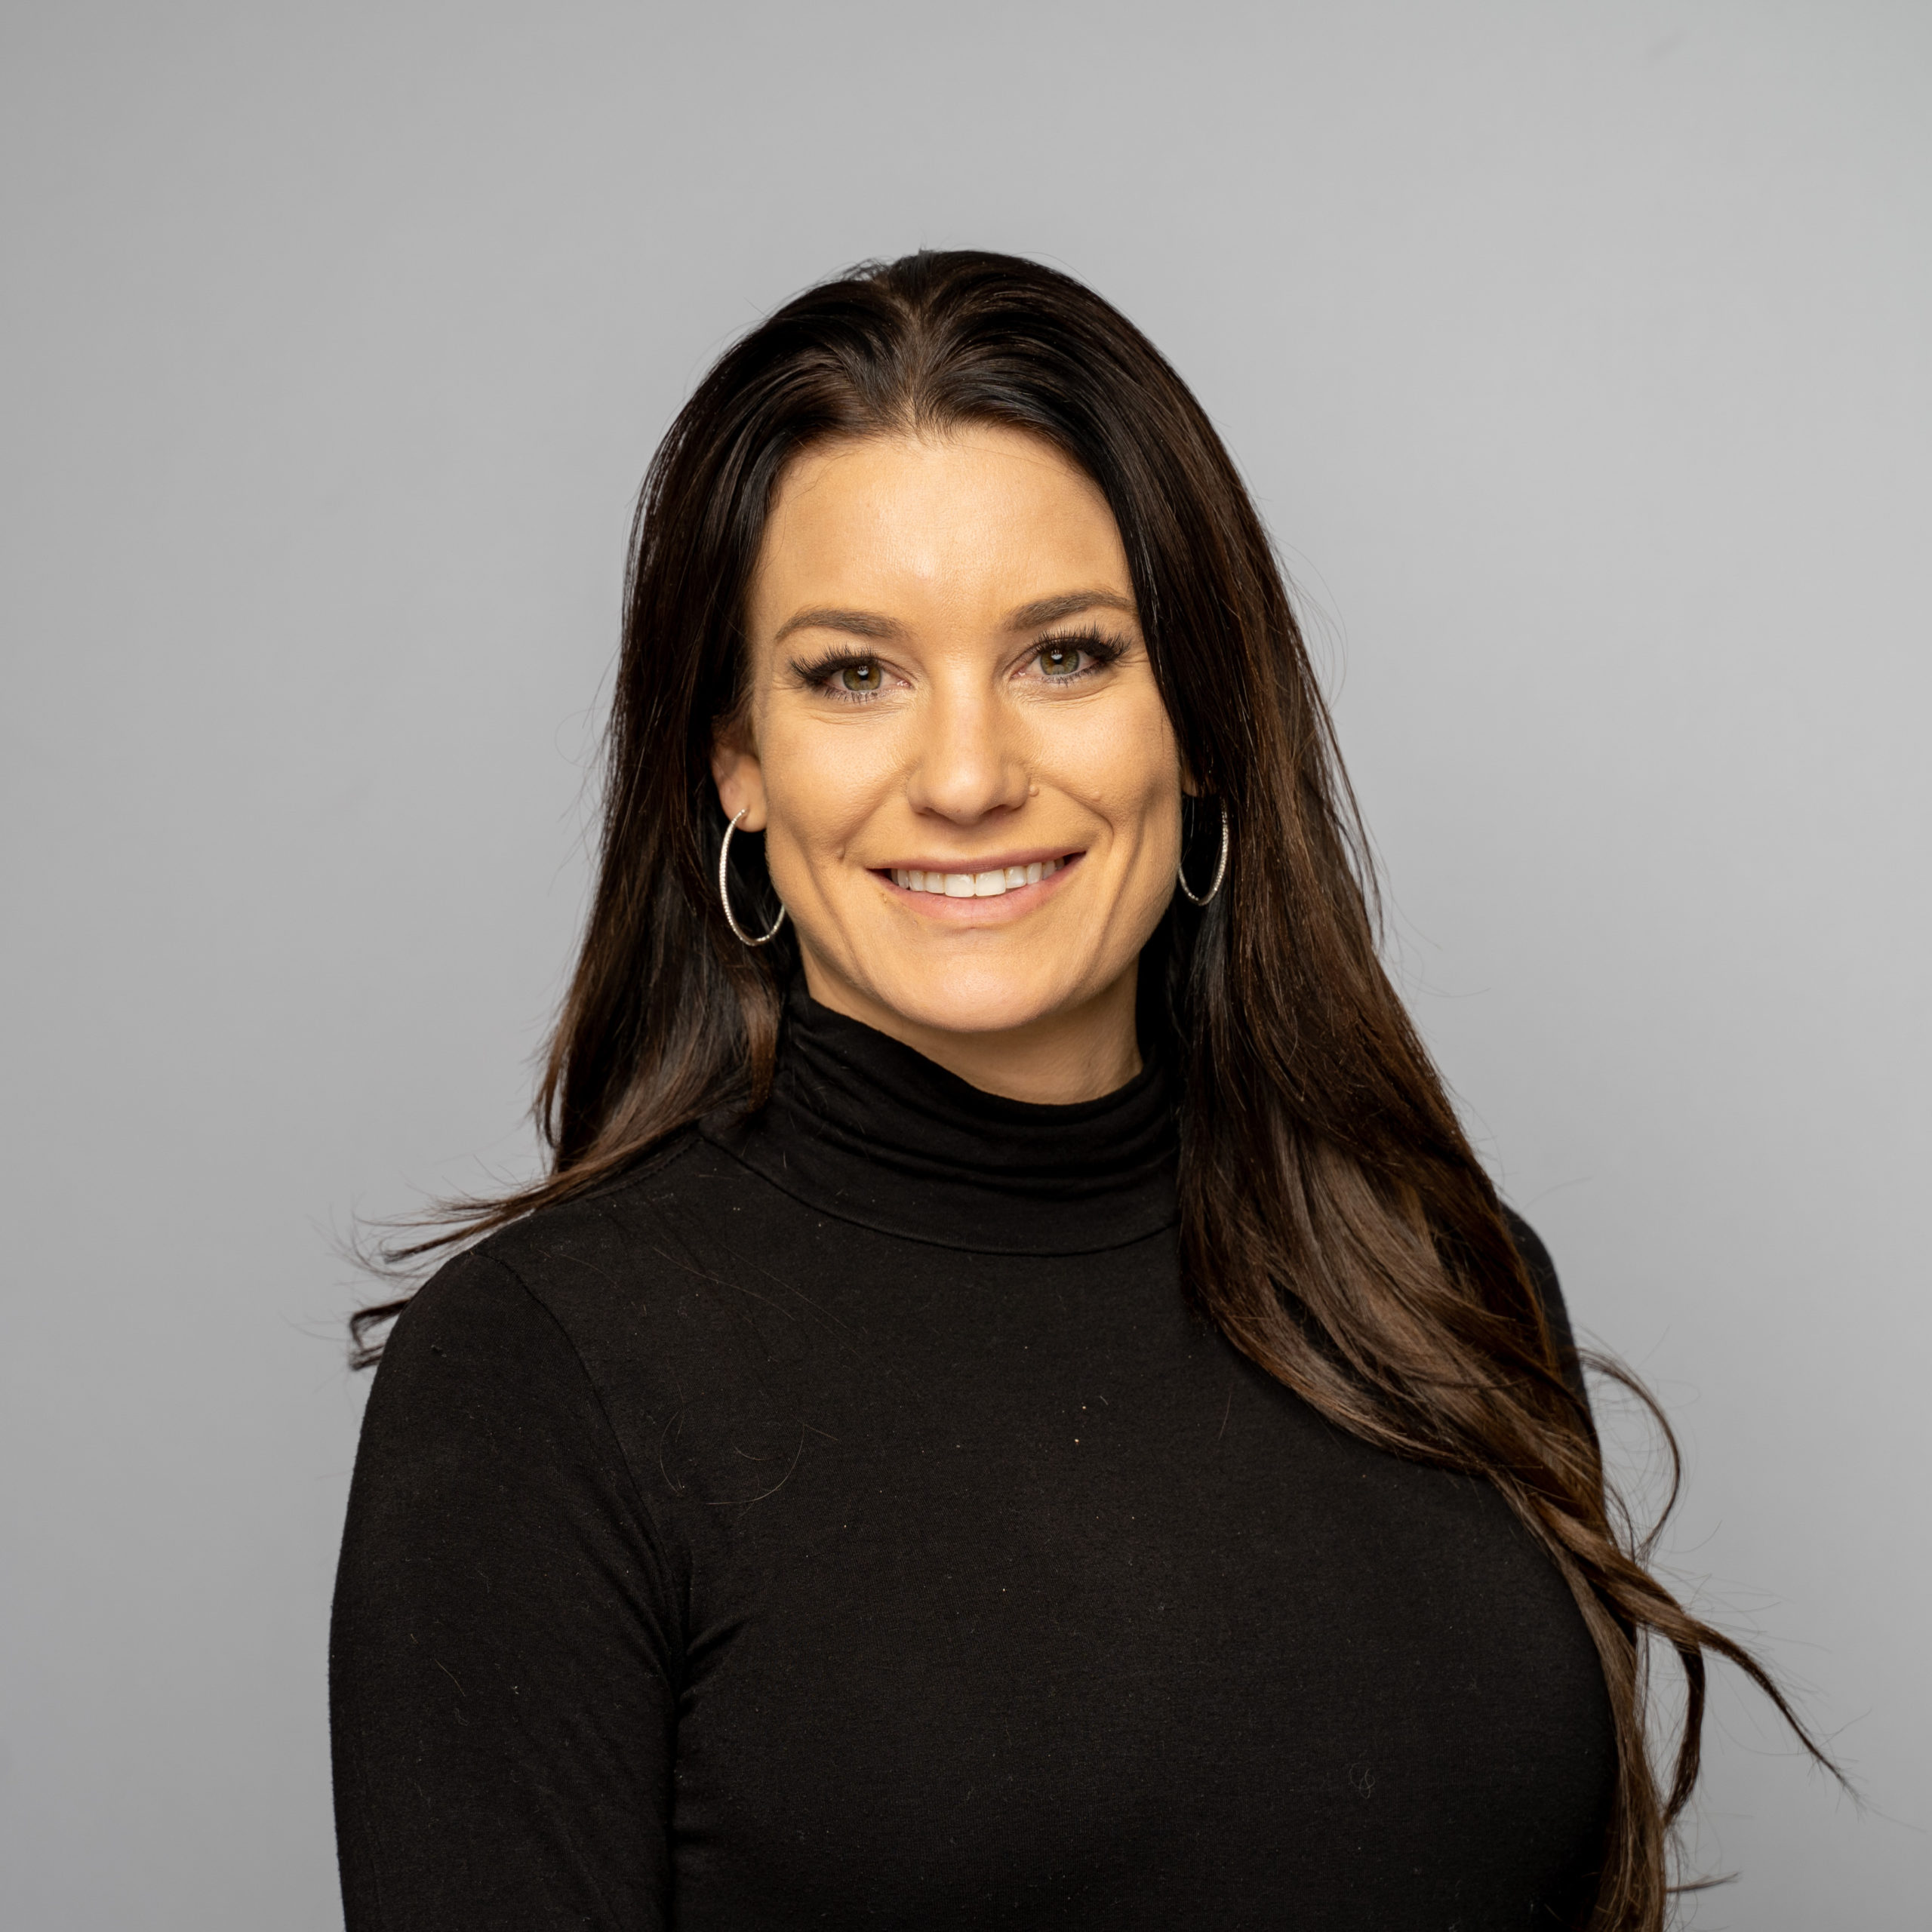 Buyside Adds Ashley Terrell as EVP of Partnerships, Continues Exponential Growth